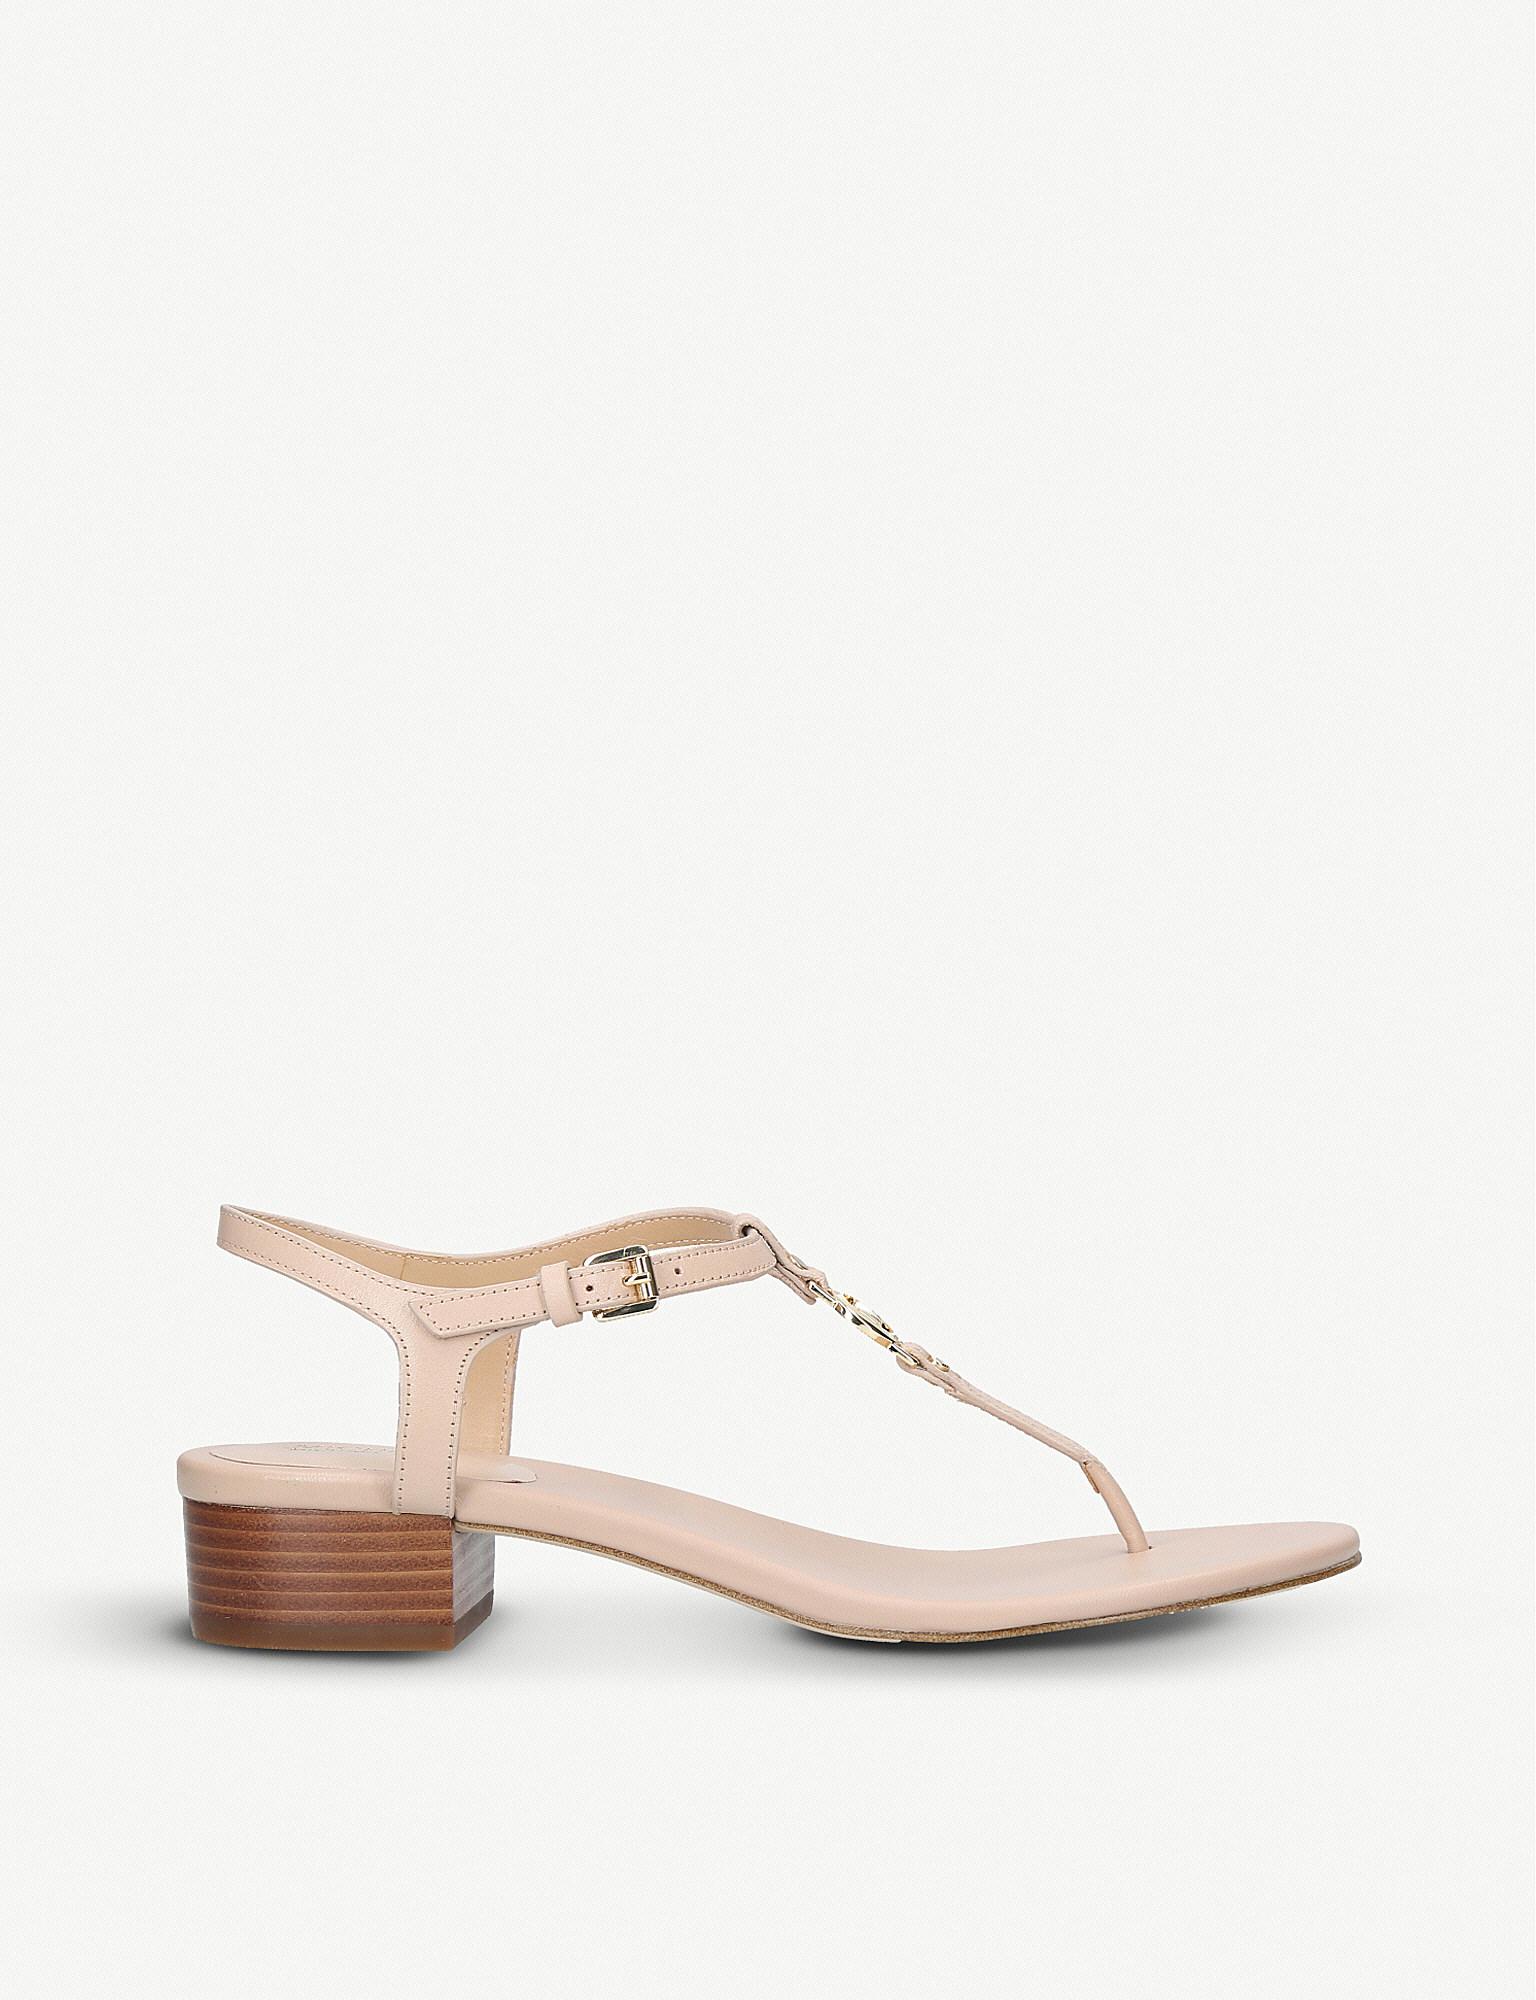 MICHAEL Michael Kors Cayla Mid Leather Sandals in Natural | Lyst